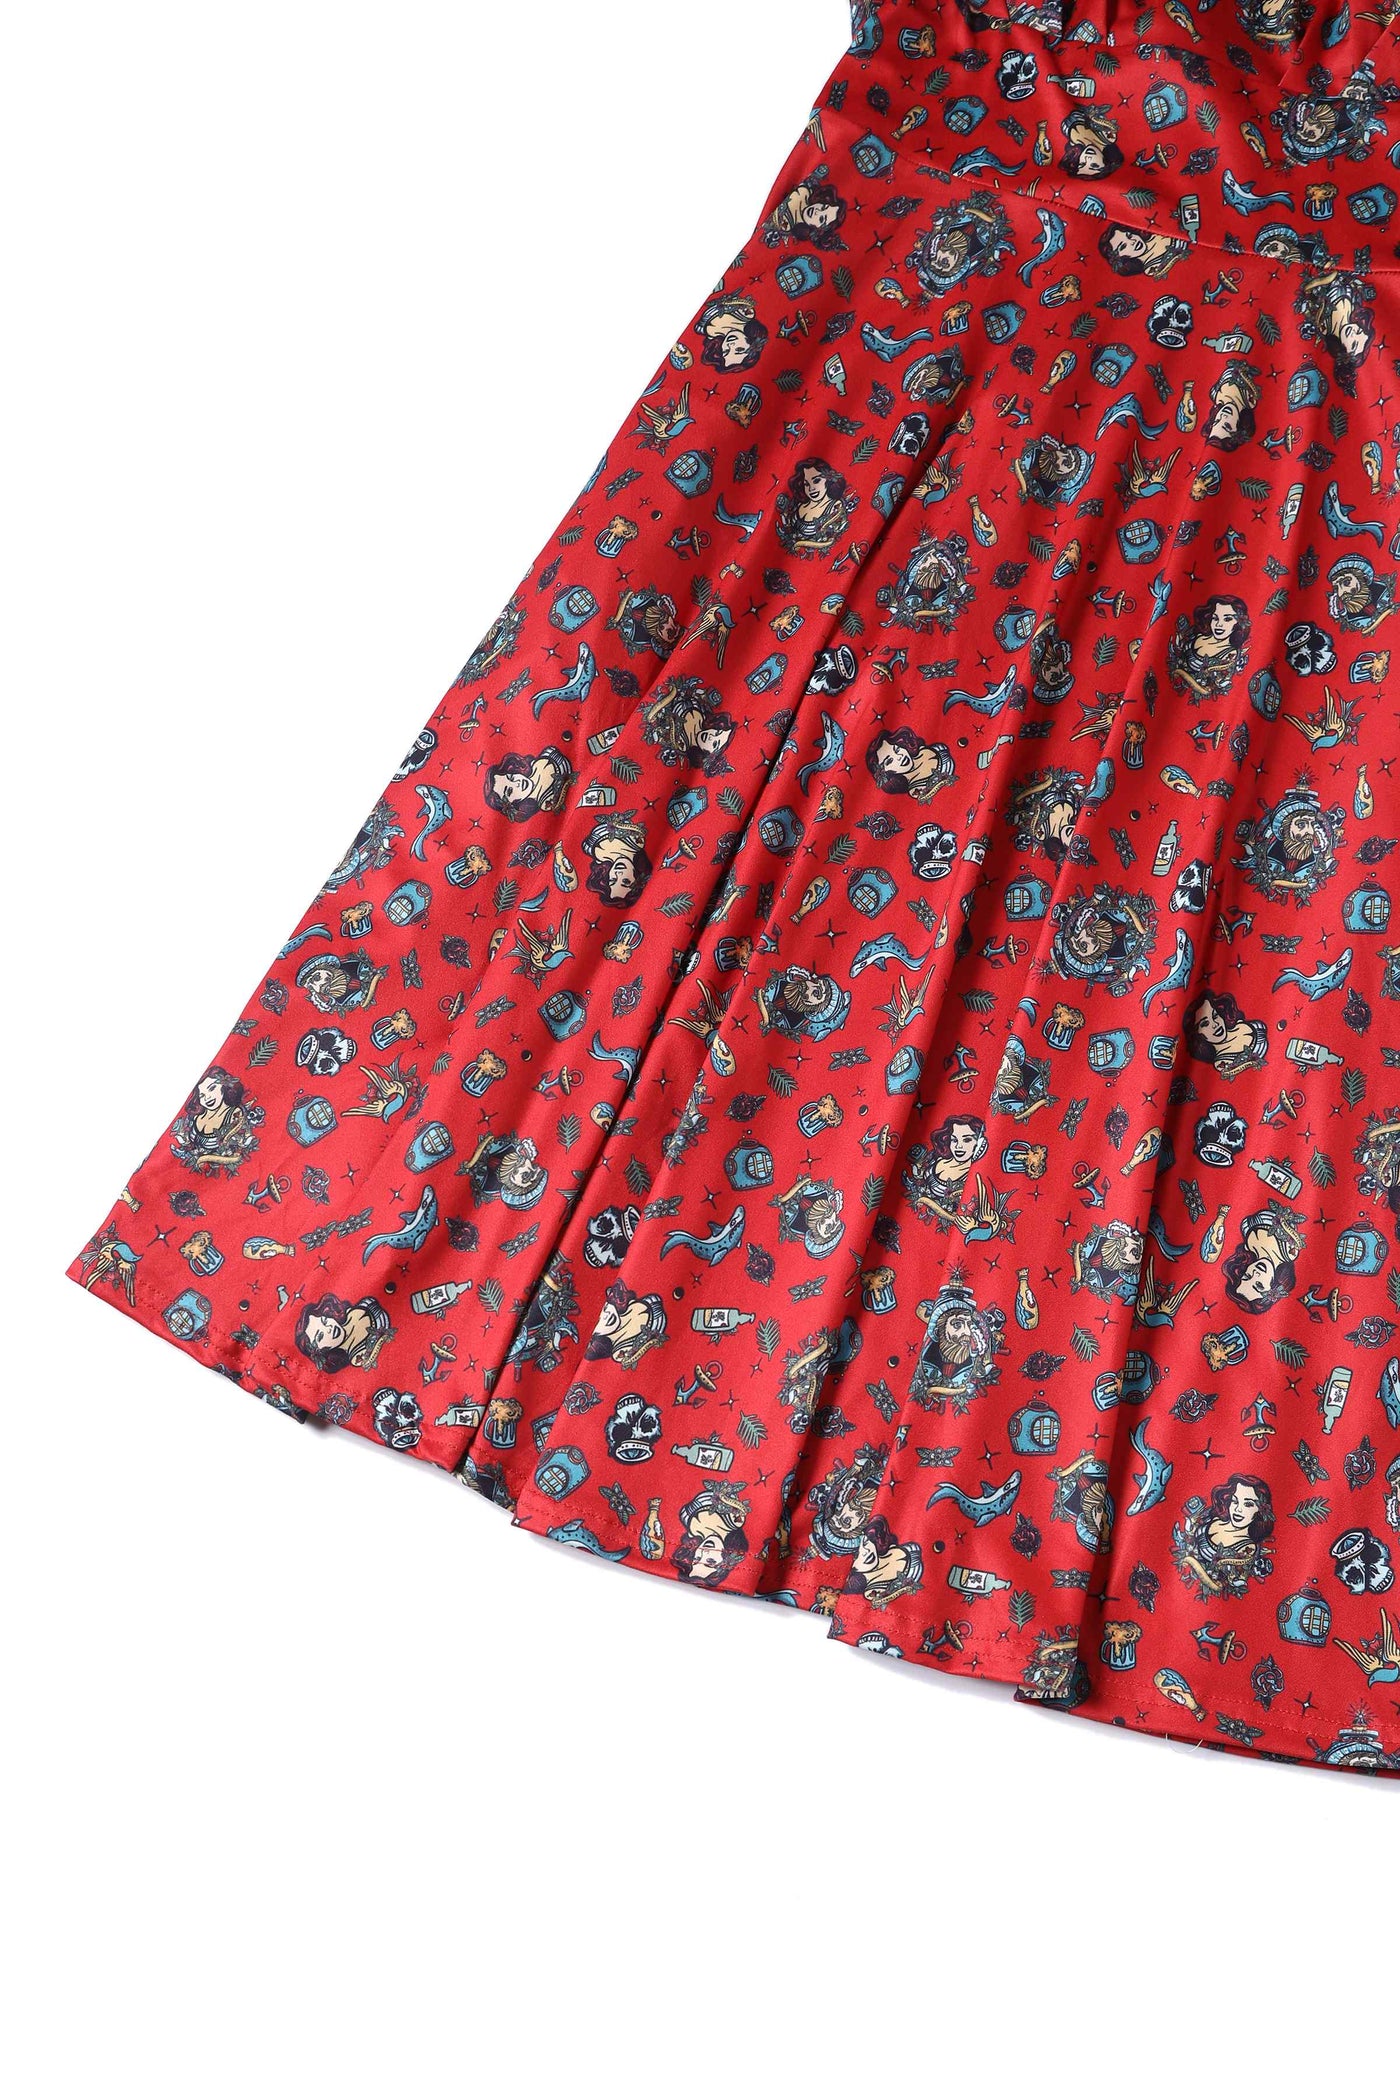 Close up view of Nautical Sailor 50s Style Dress in Red